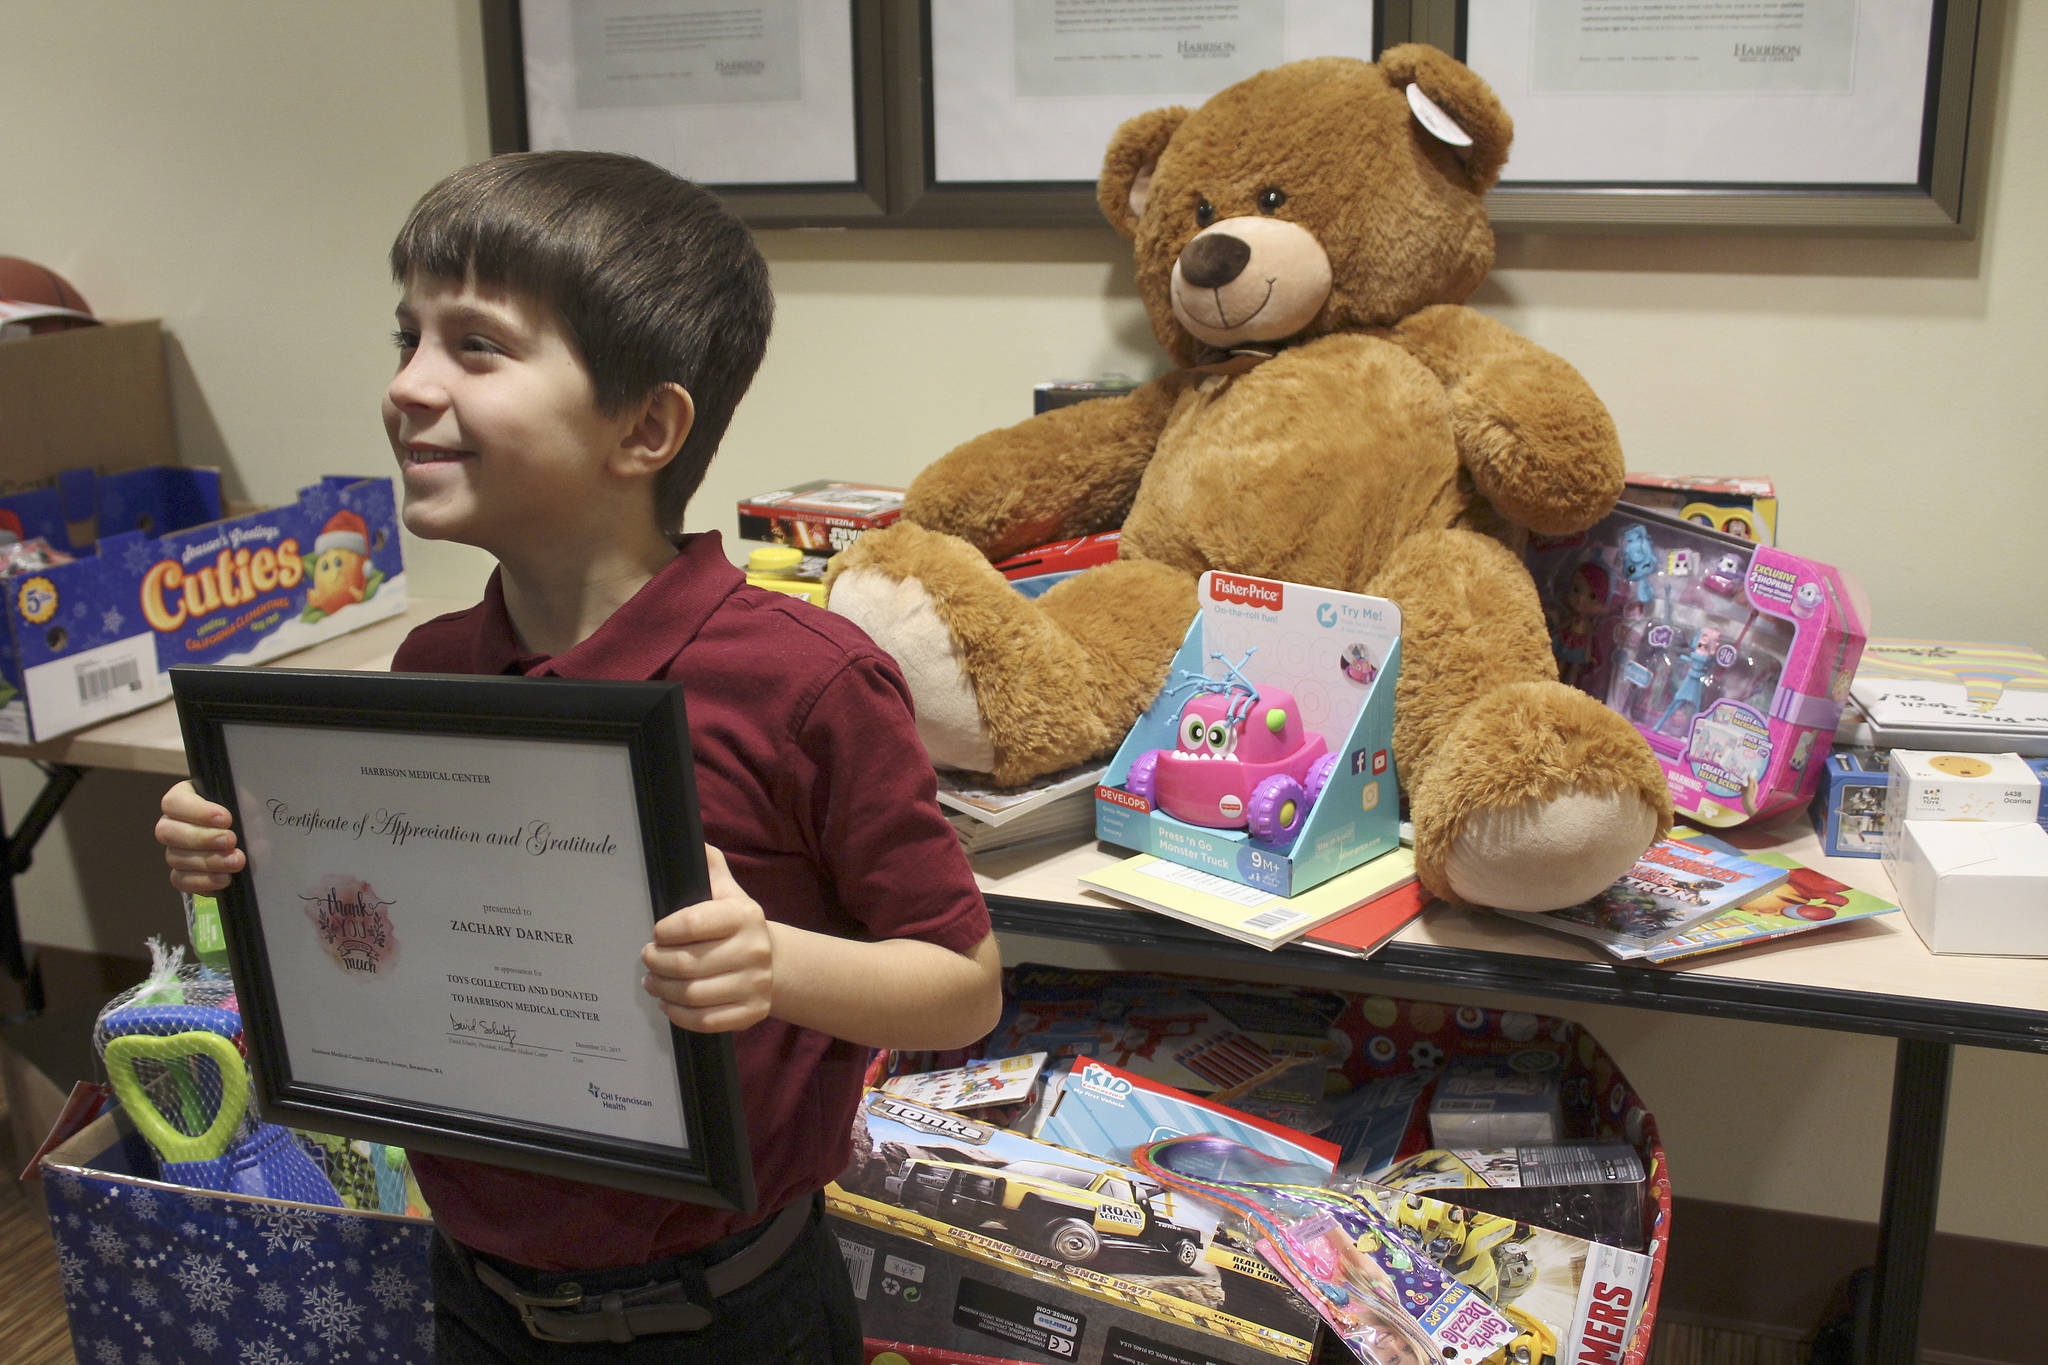 Zachary Darner founded Kidzz Helping Kidzz to collect donations of toys for gifting to children in three area hospitals. This year, the group collected and delivered more than 1,500 toys. (Courtesy photos)